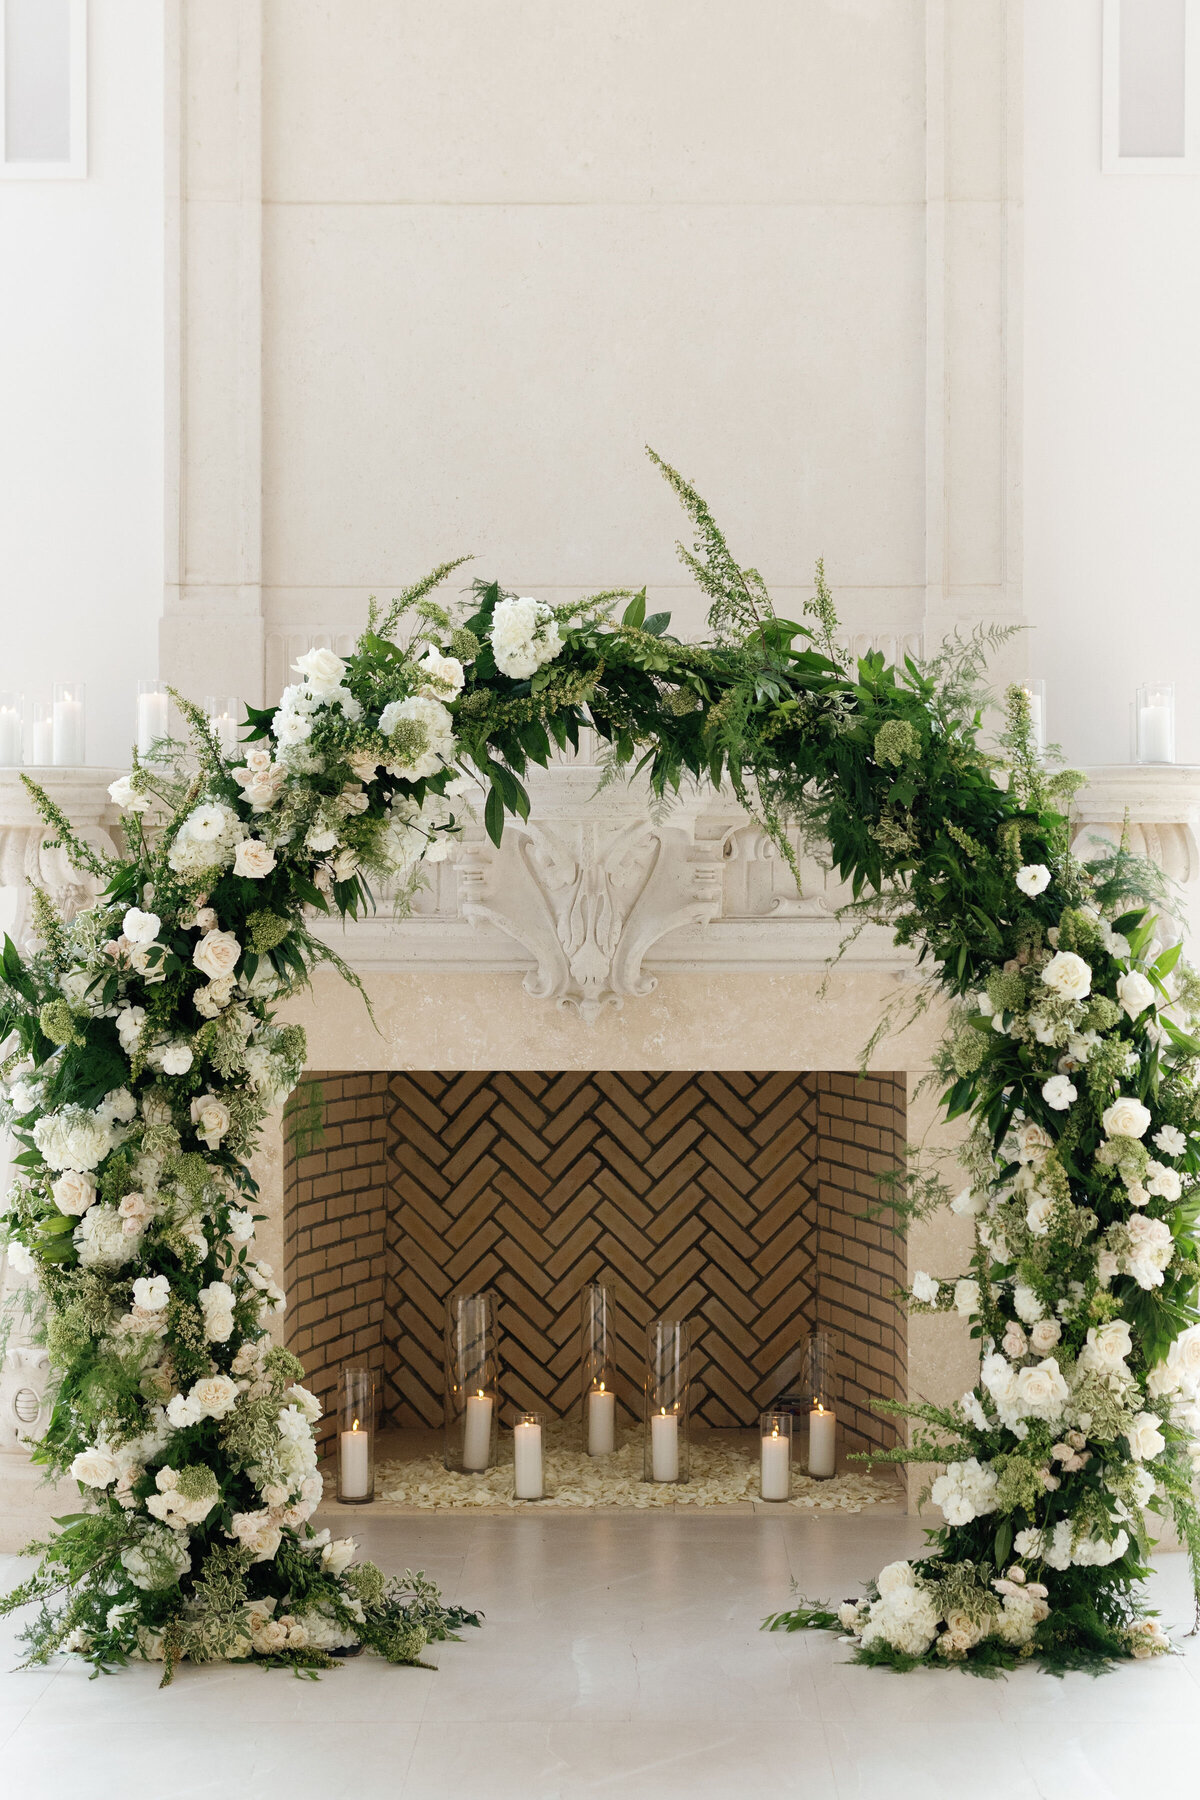 greenery-and-white-wedding-ceremony-arch-flowers-wedding-florist-floral-installation-enza-events